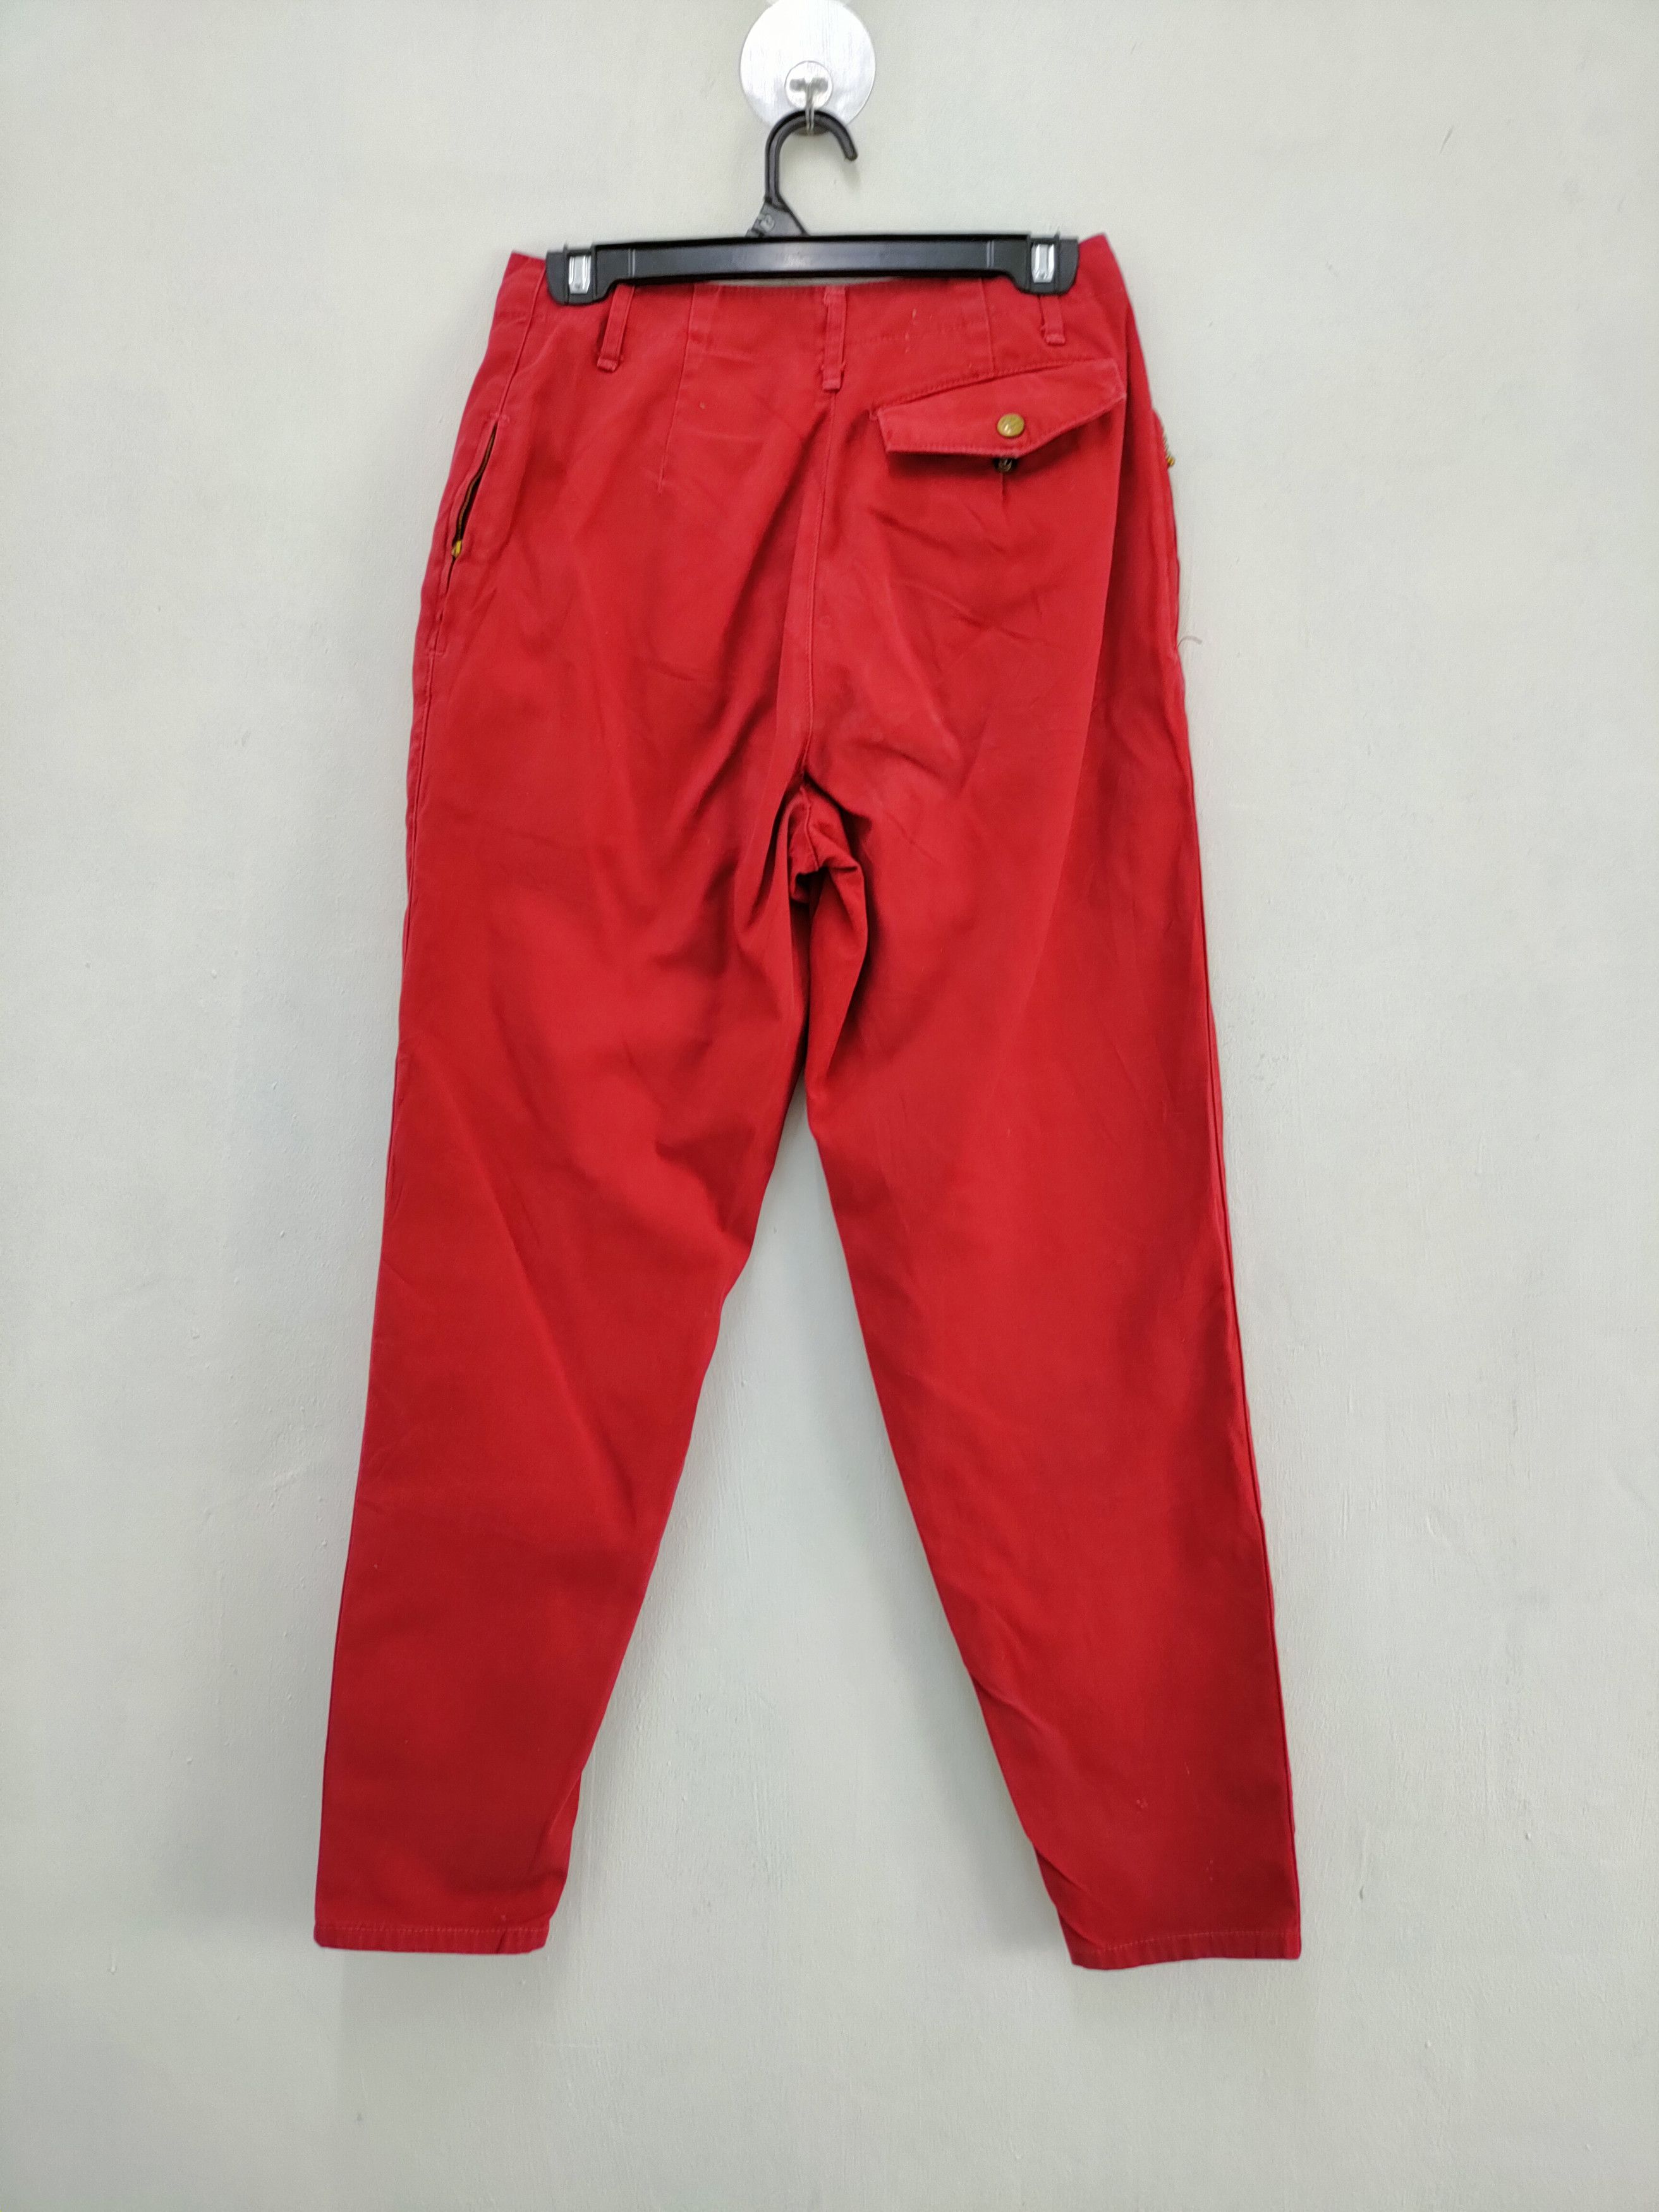 Linea Linea Vicenza Red Pants Made In Japan Size US 26 / EU 42 - 2 Preview